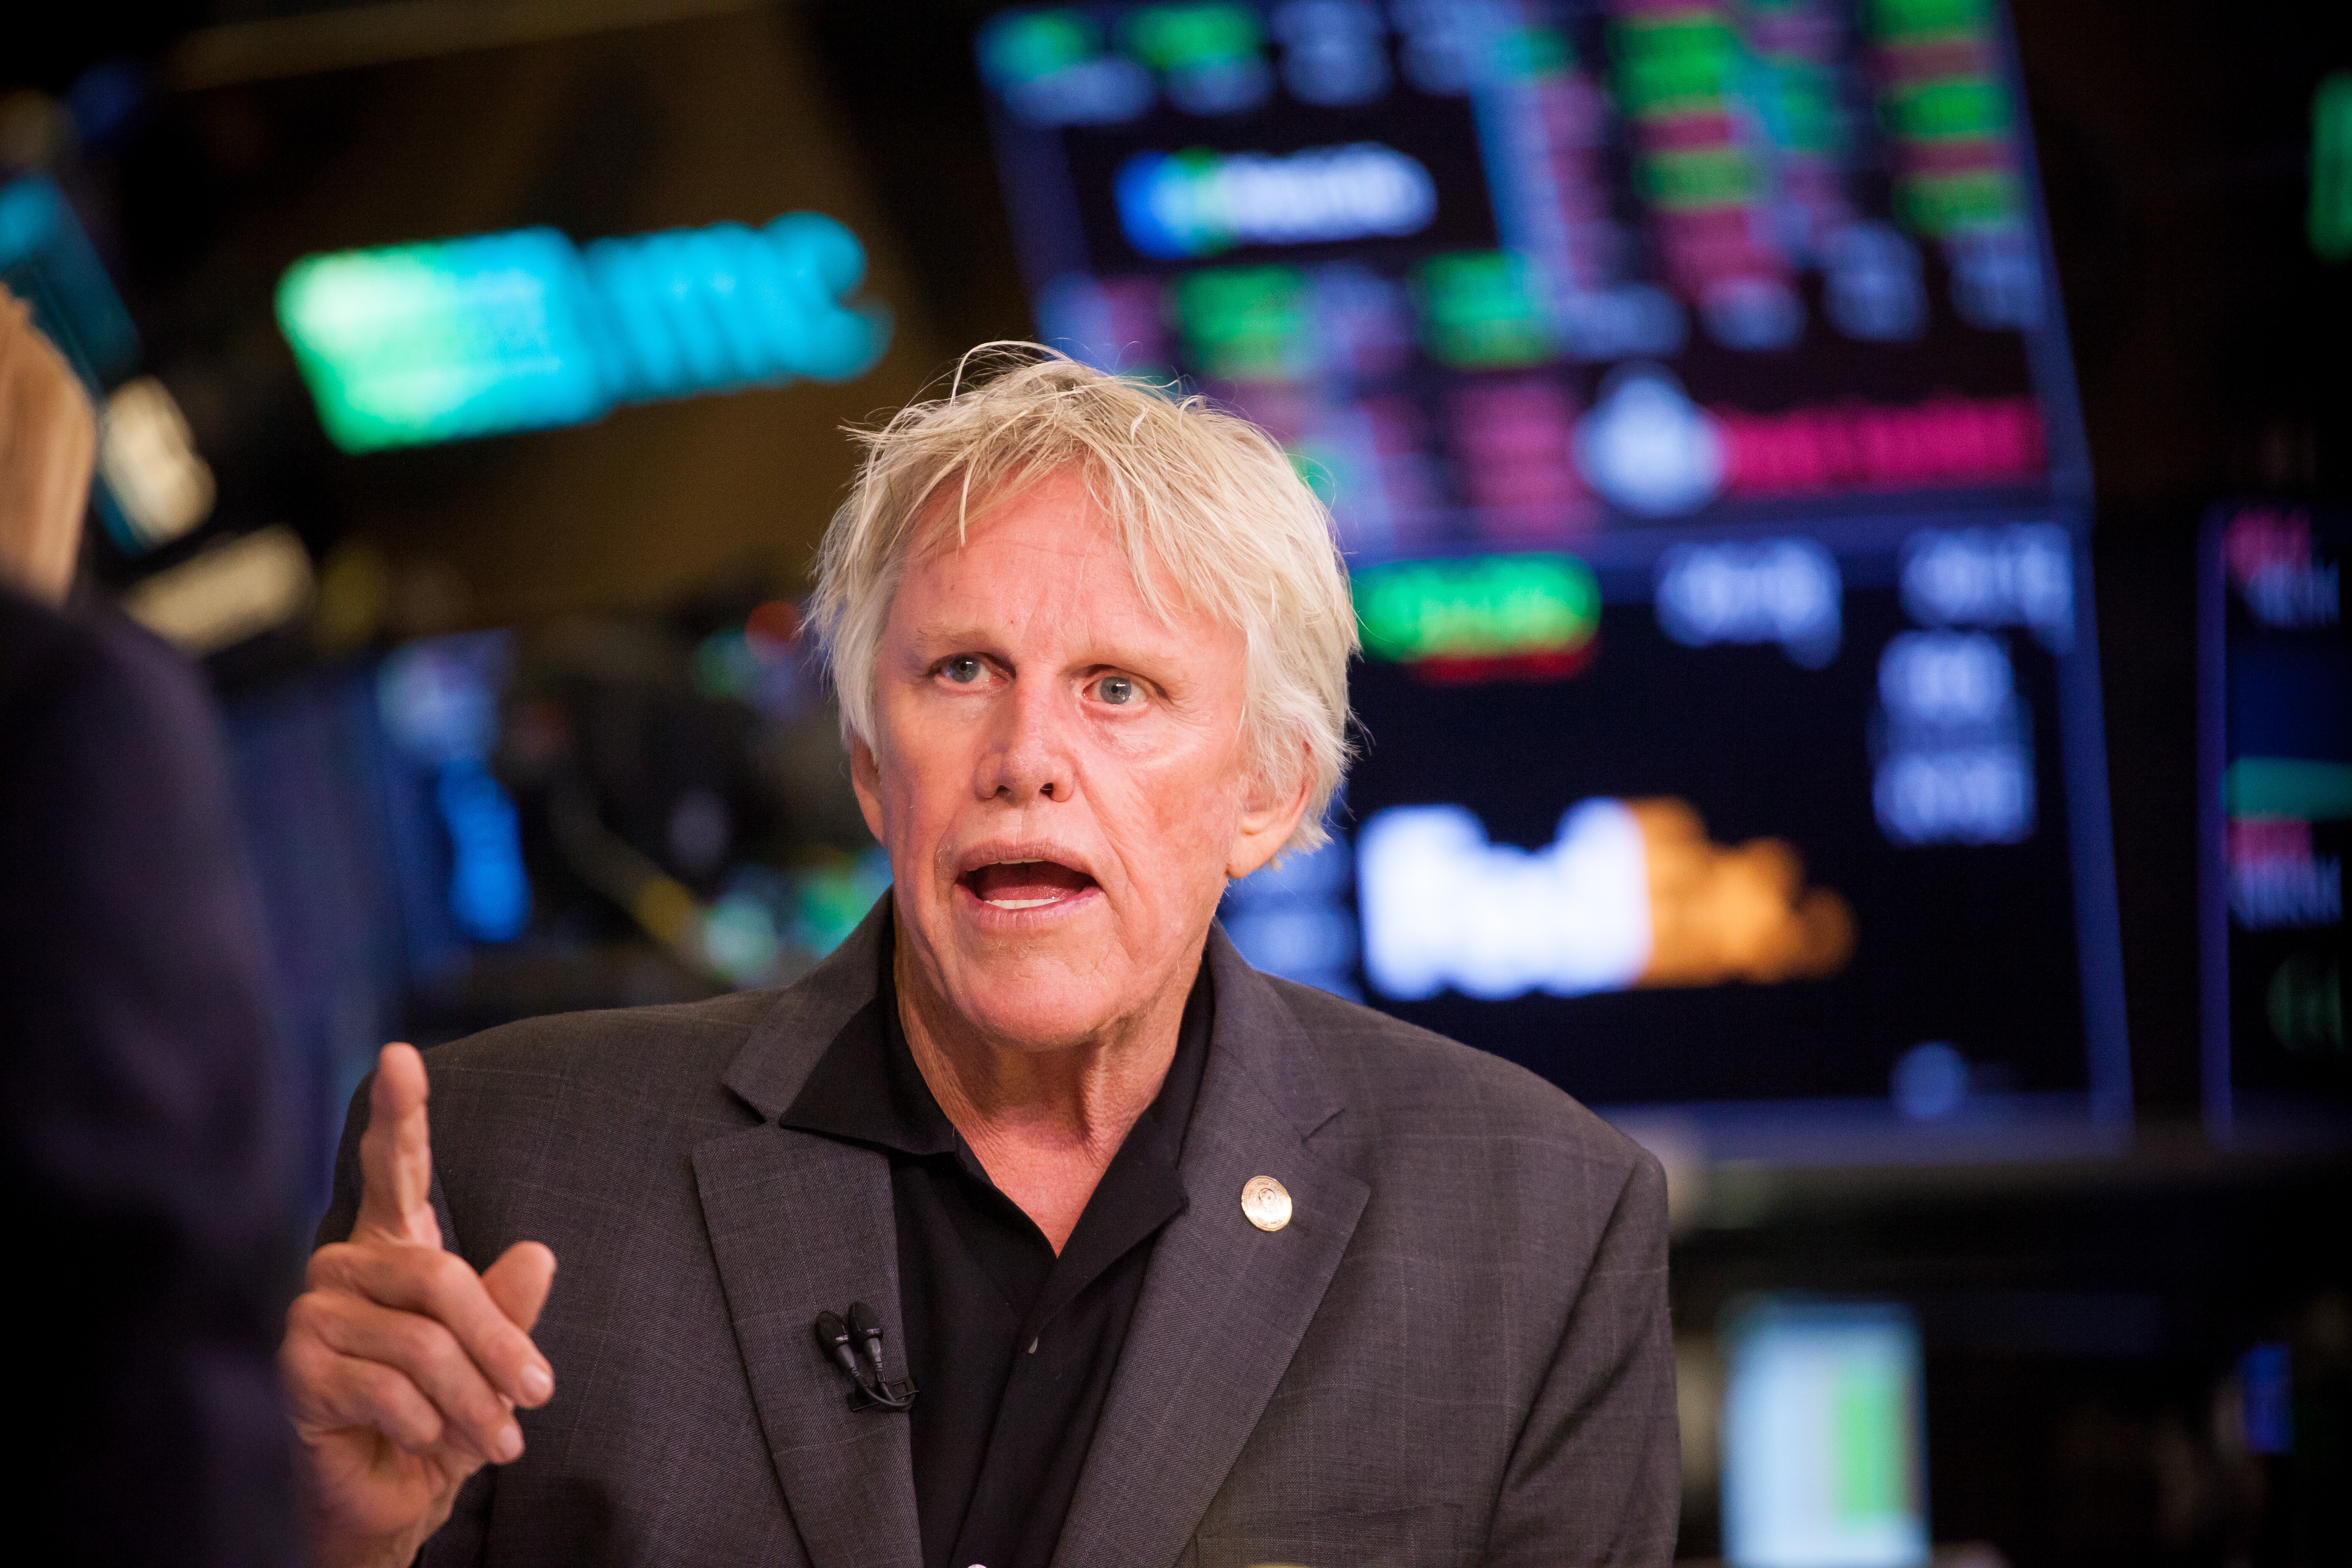 Actor Gary Busey on the floor of the New York Stock Exchange (NYSE) in New York, on Tuesday, September 4, 2018. | Source: Getty Images